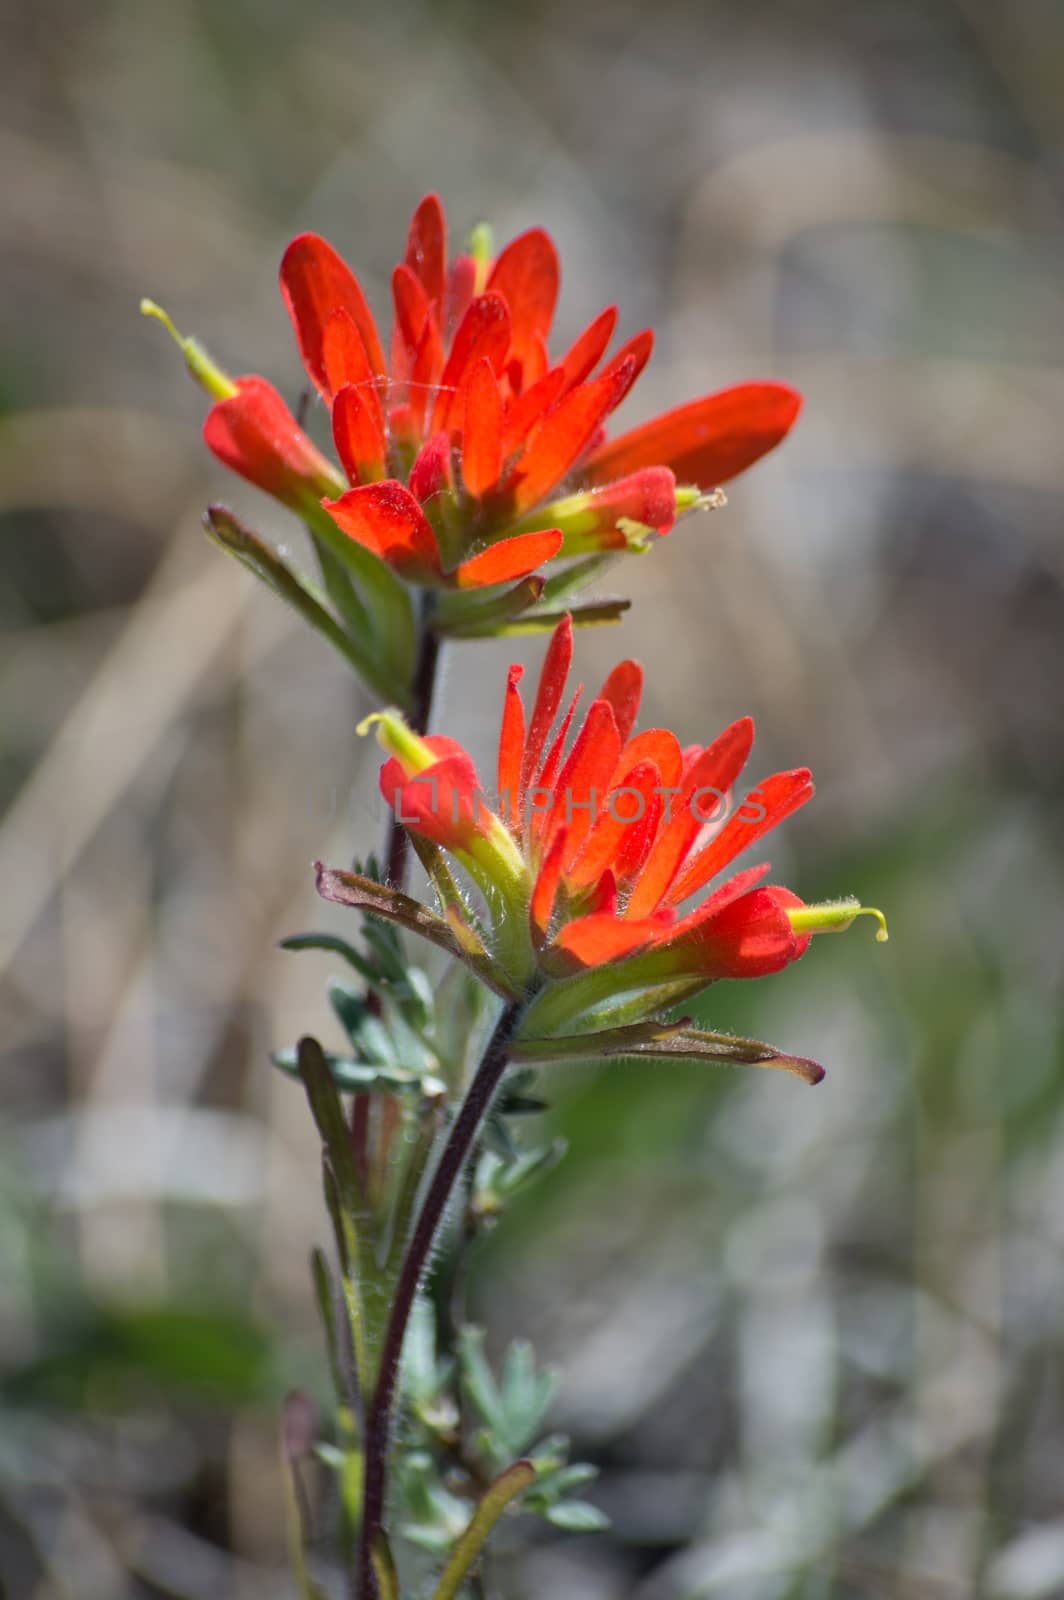 The bright red color of these two wild flowers are vivid against the grey green early spring background